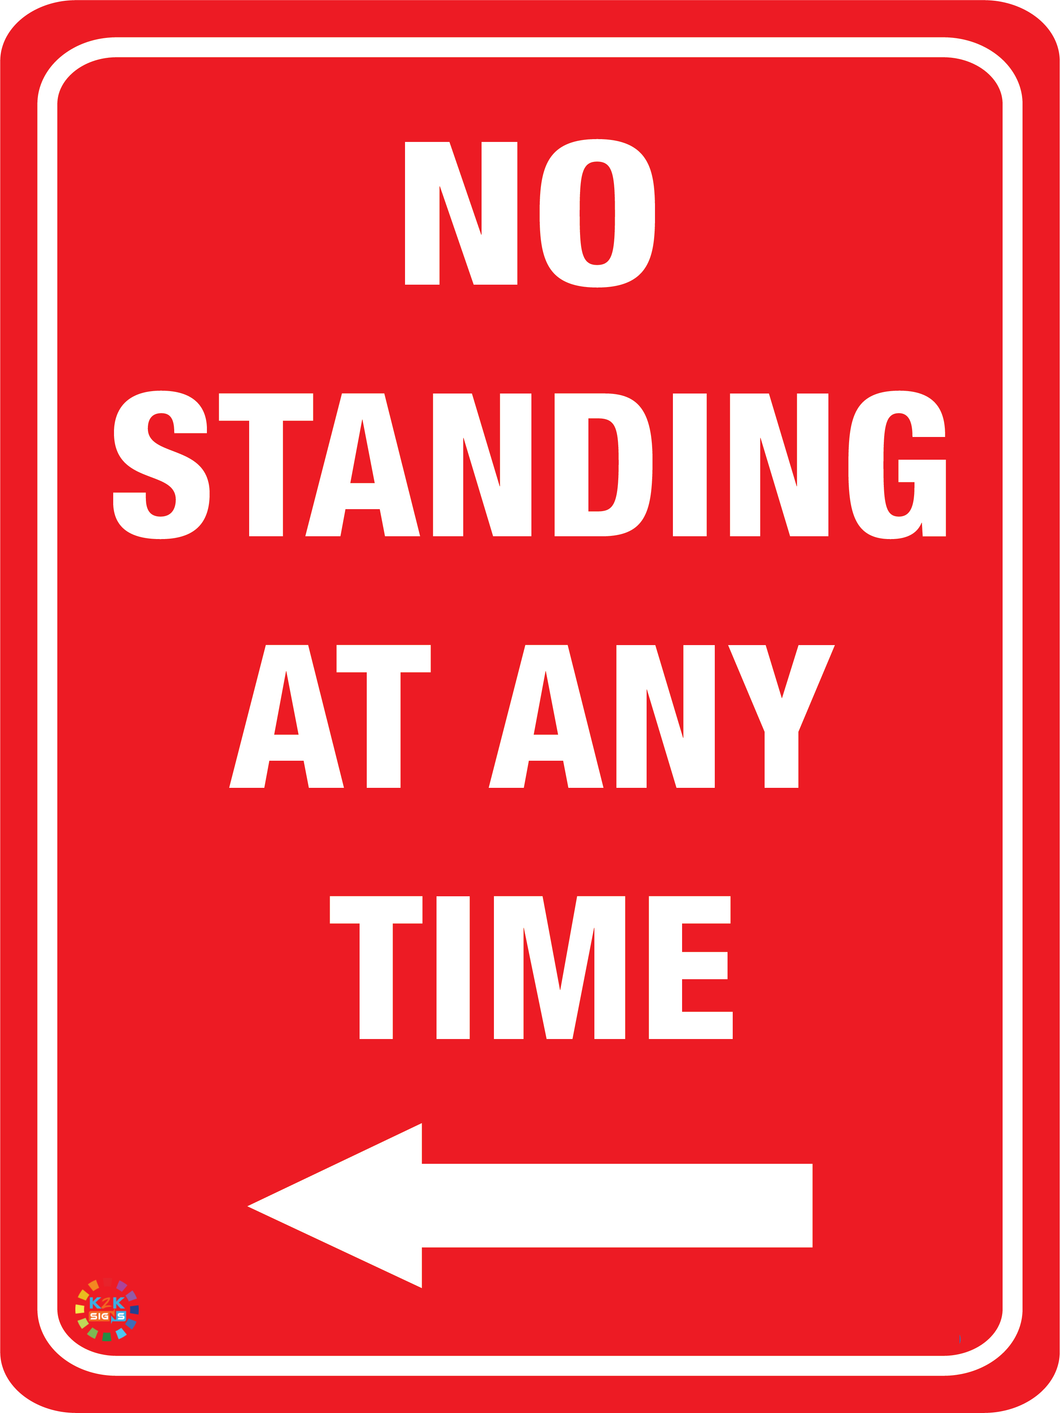 No Standing At Any Time ( Left Arrow) Sign